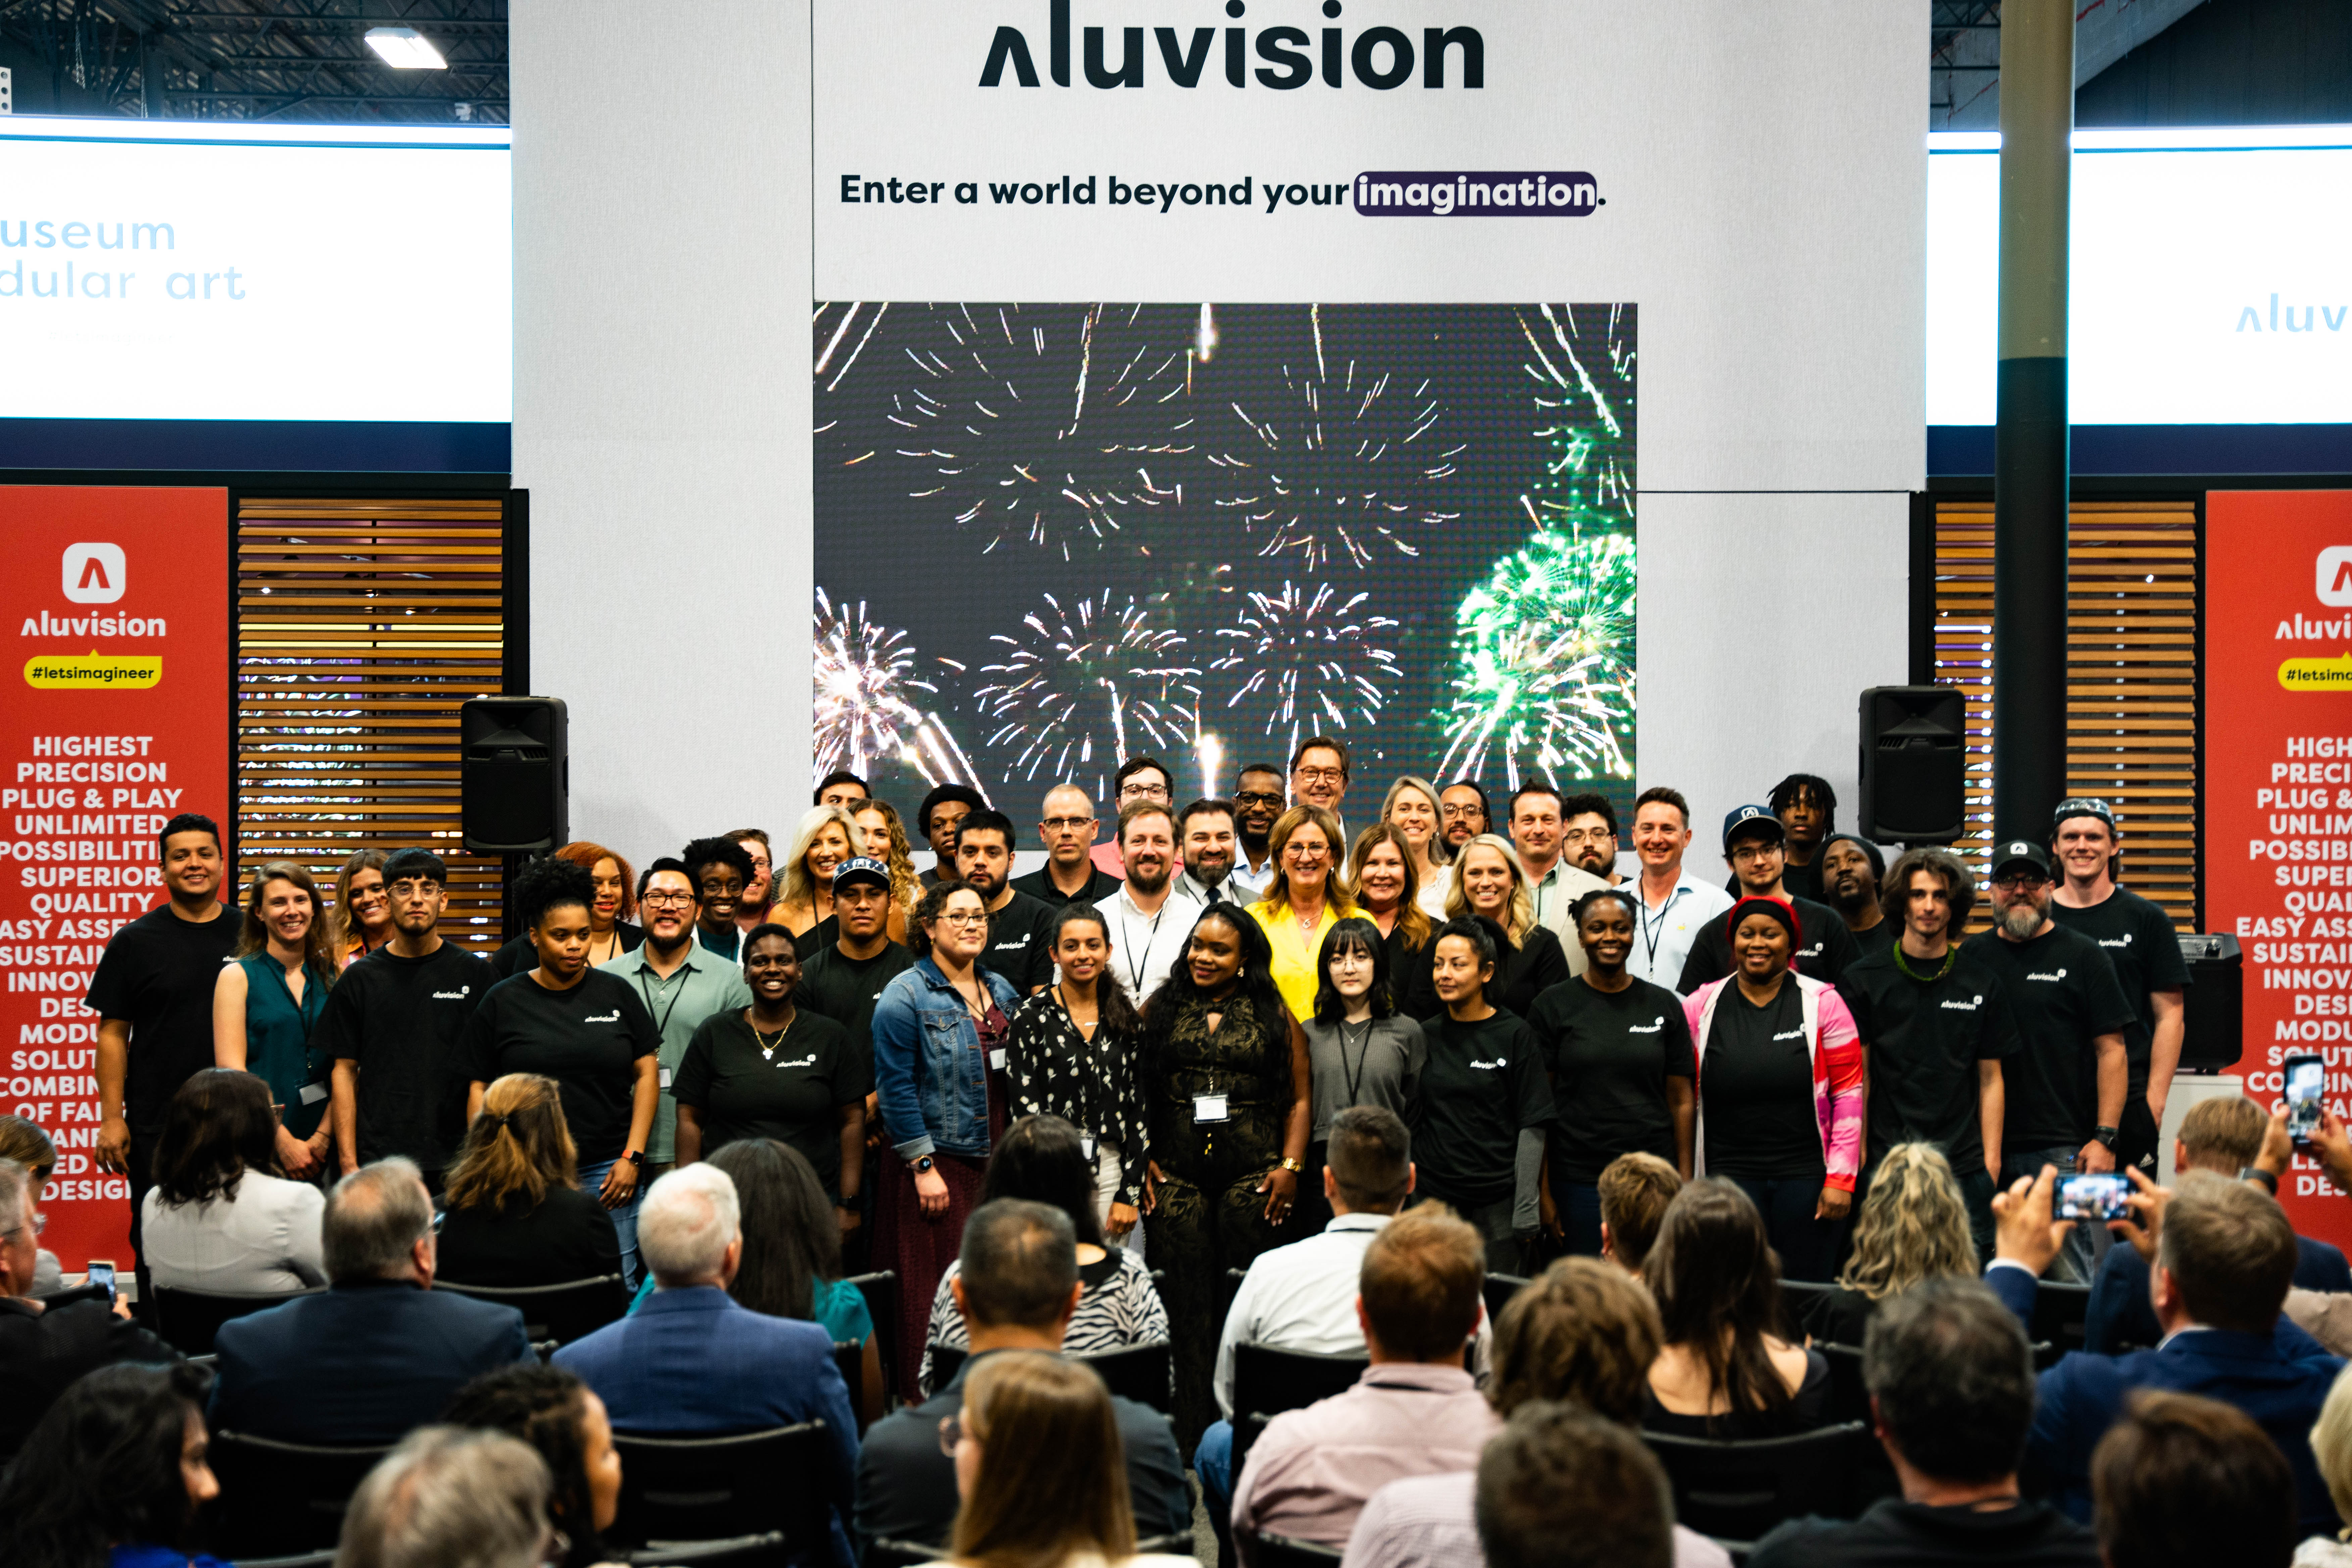 Aluvision Inc. has expanded!